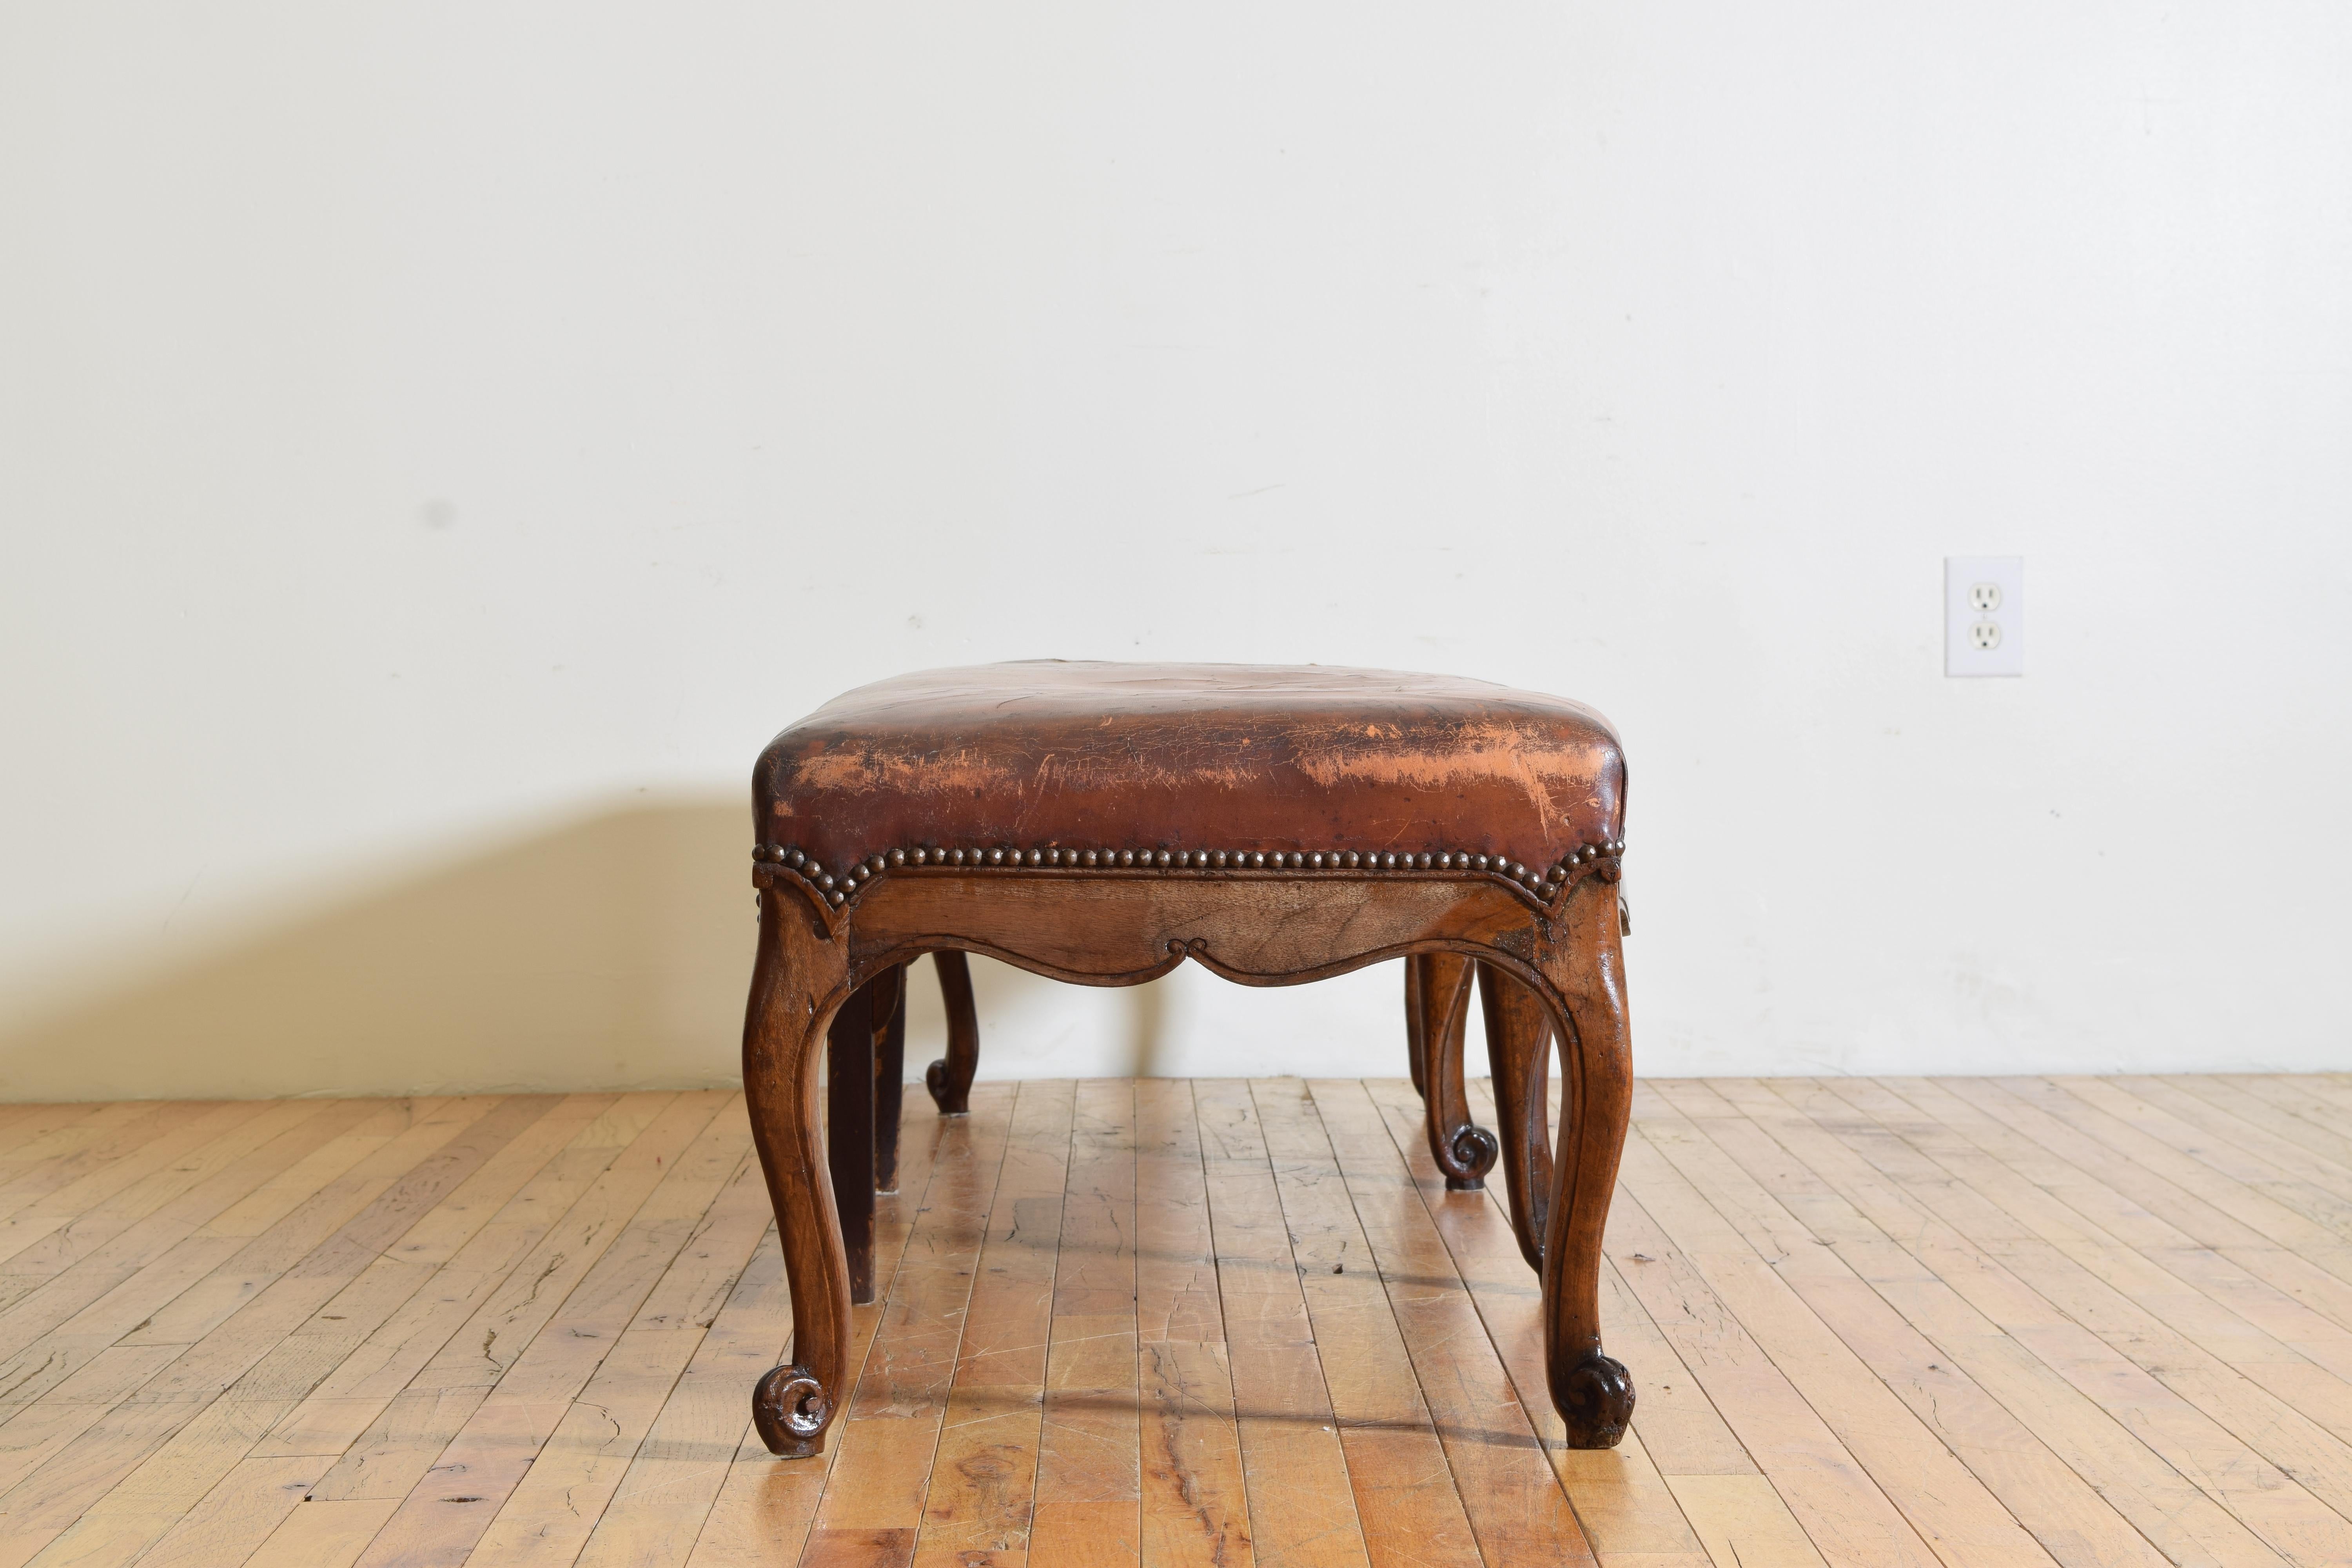 Mid-18th Century French Louis XV Period Carved Walnut & Leather Upholstered Bench, mid 18th cen.